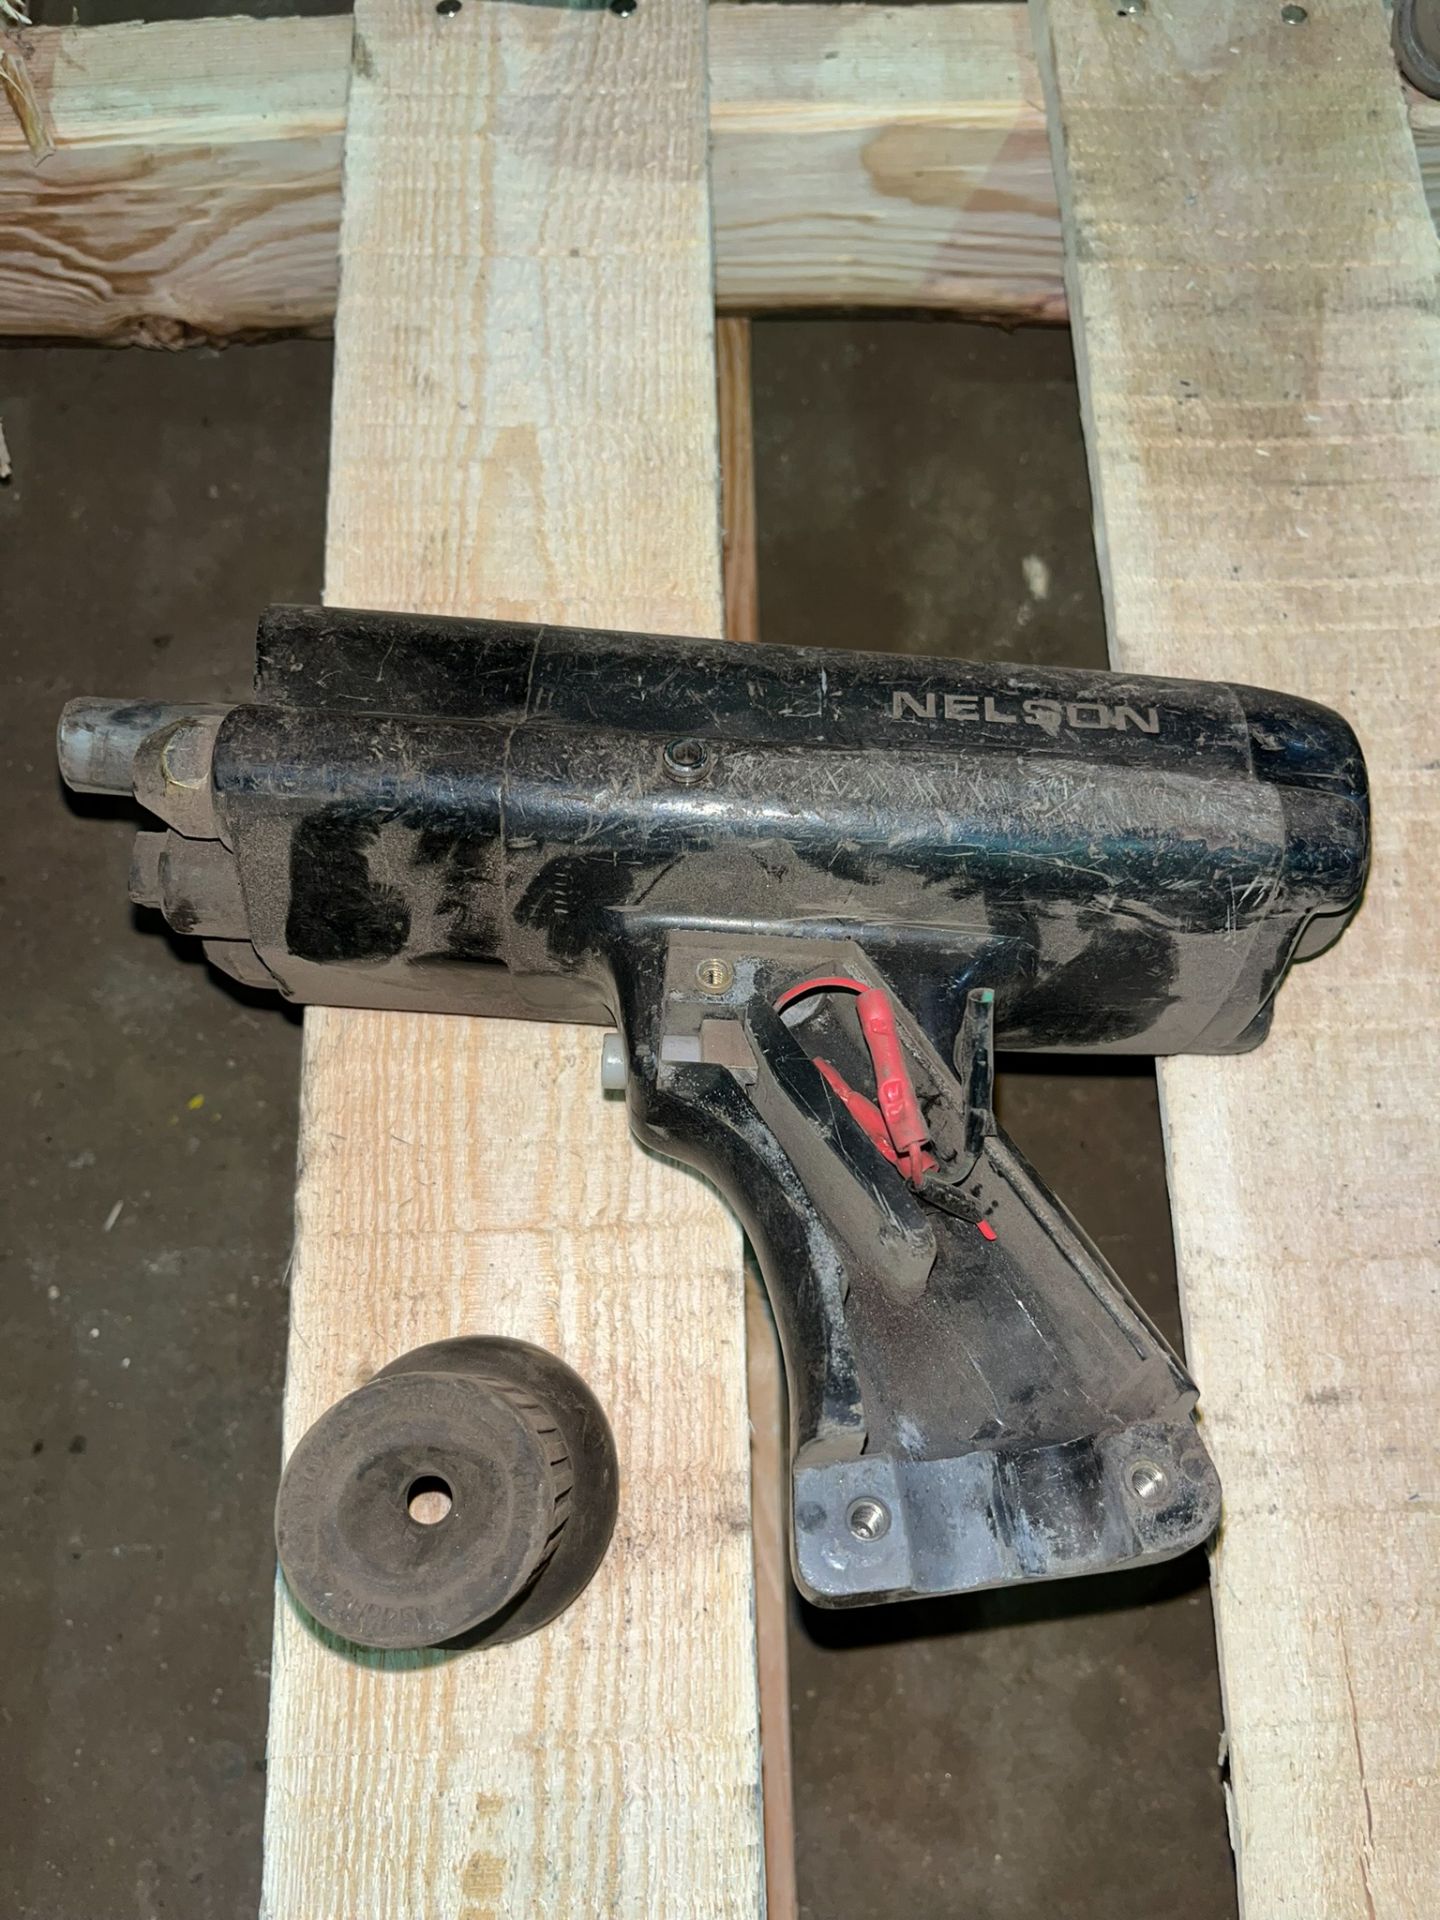 LOT/ NELSON STUD GUN PARTS [RIGGING FEES FOR LOT #111B - $40 USD PLUS APPLICABLE TAXES] - Image 3 of 8